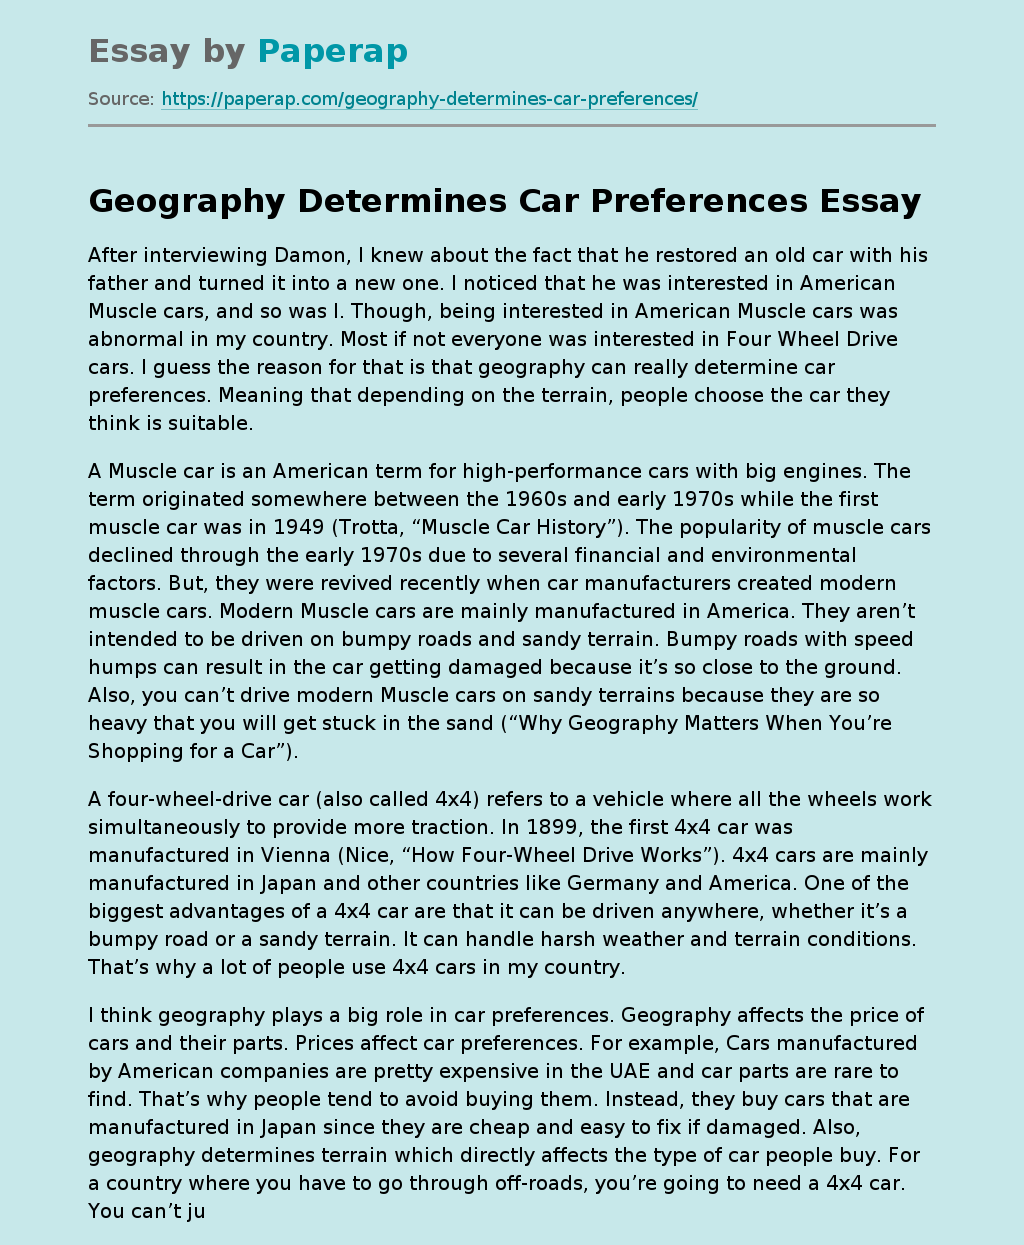 Geography Determines Car Preferences